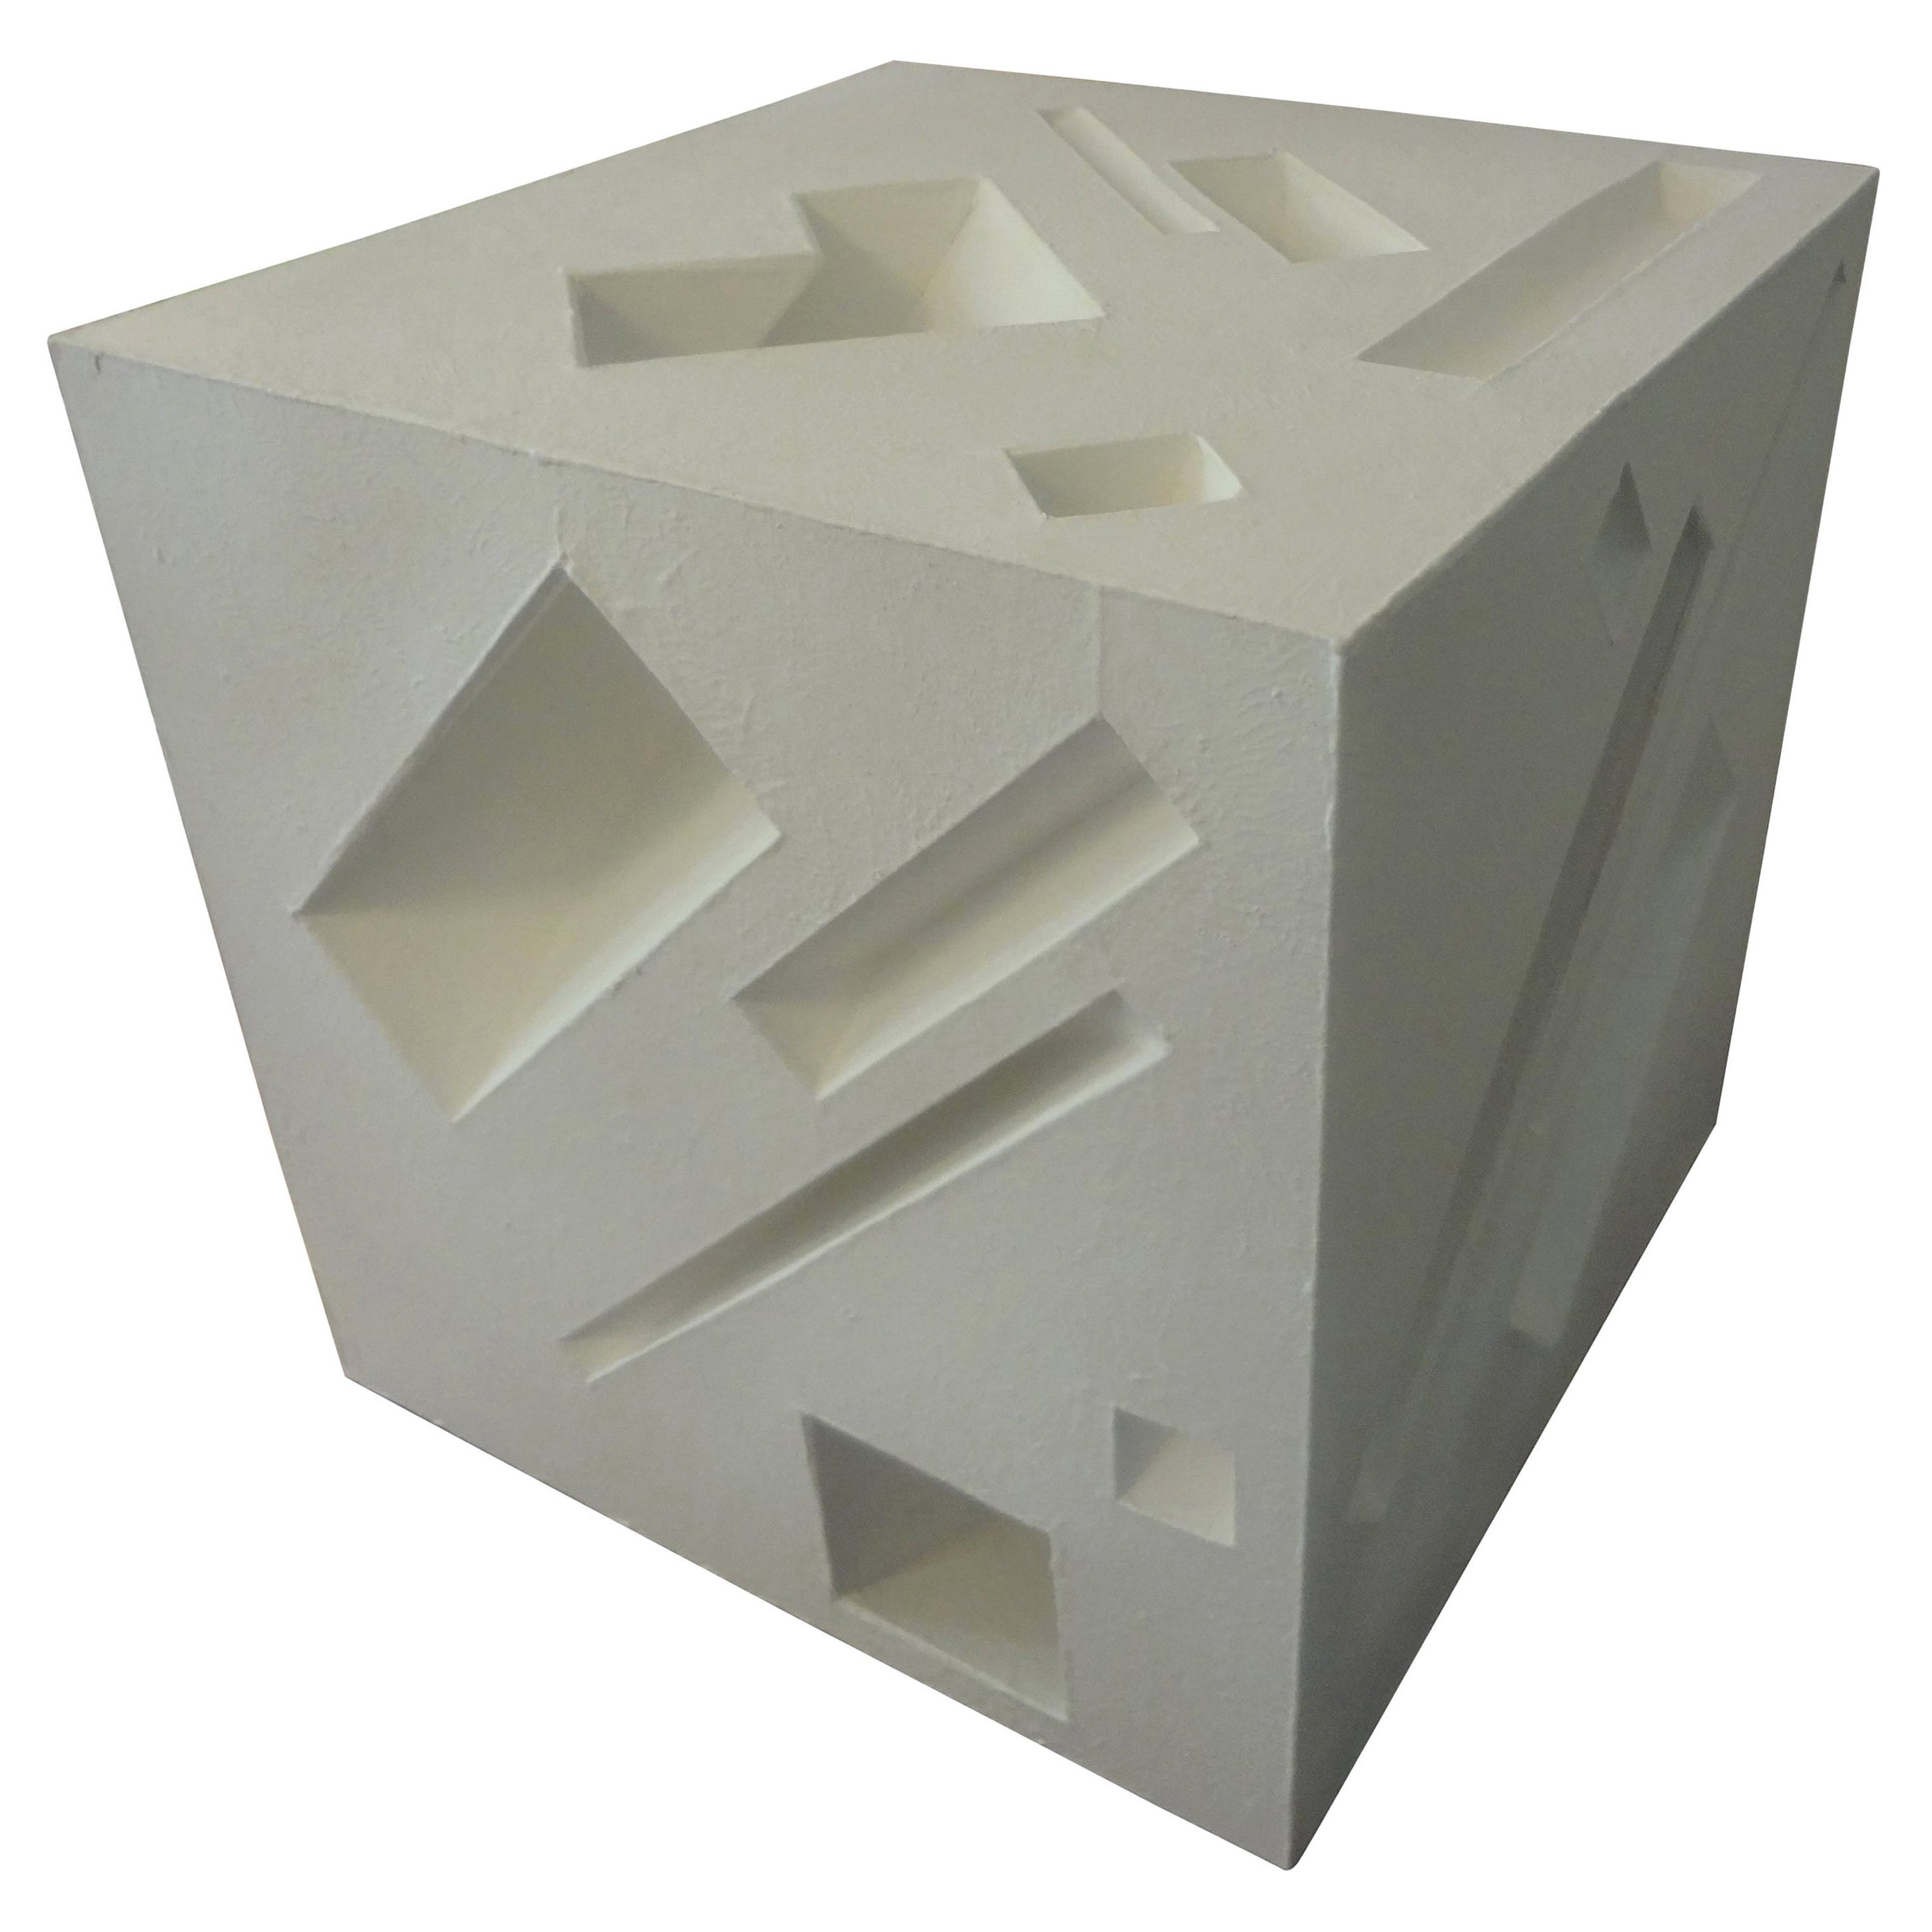 Mid-Century Modern Abstract Cube Sculpture Signed Steve Upham For Sale